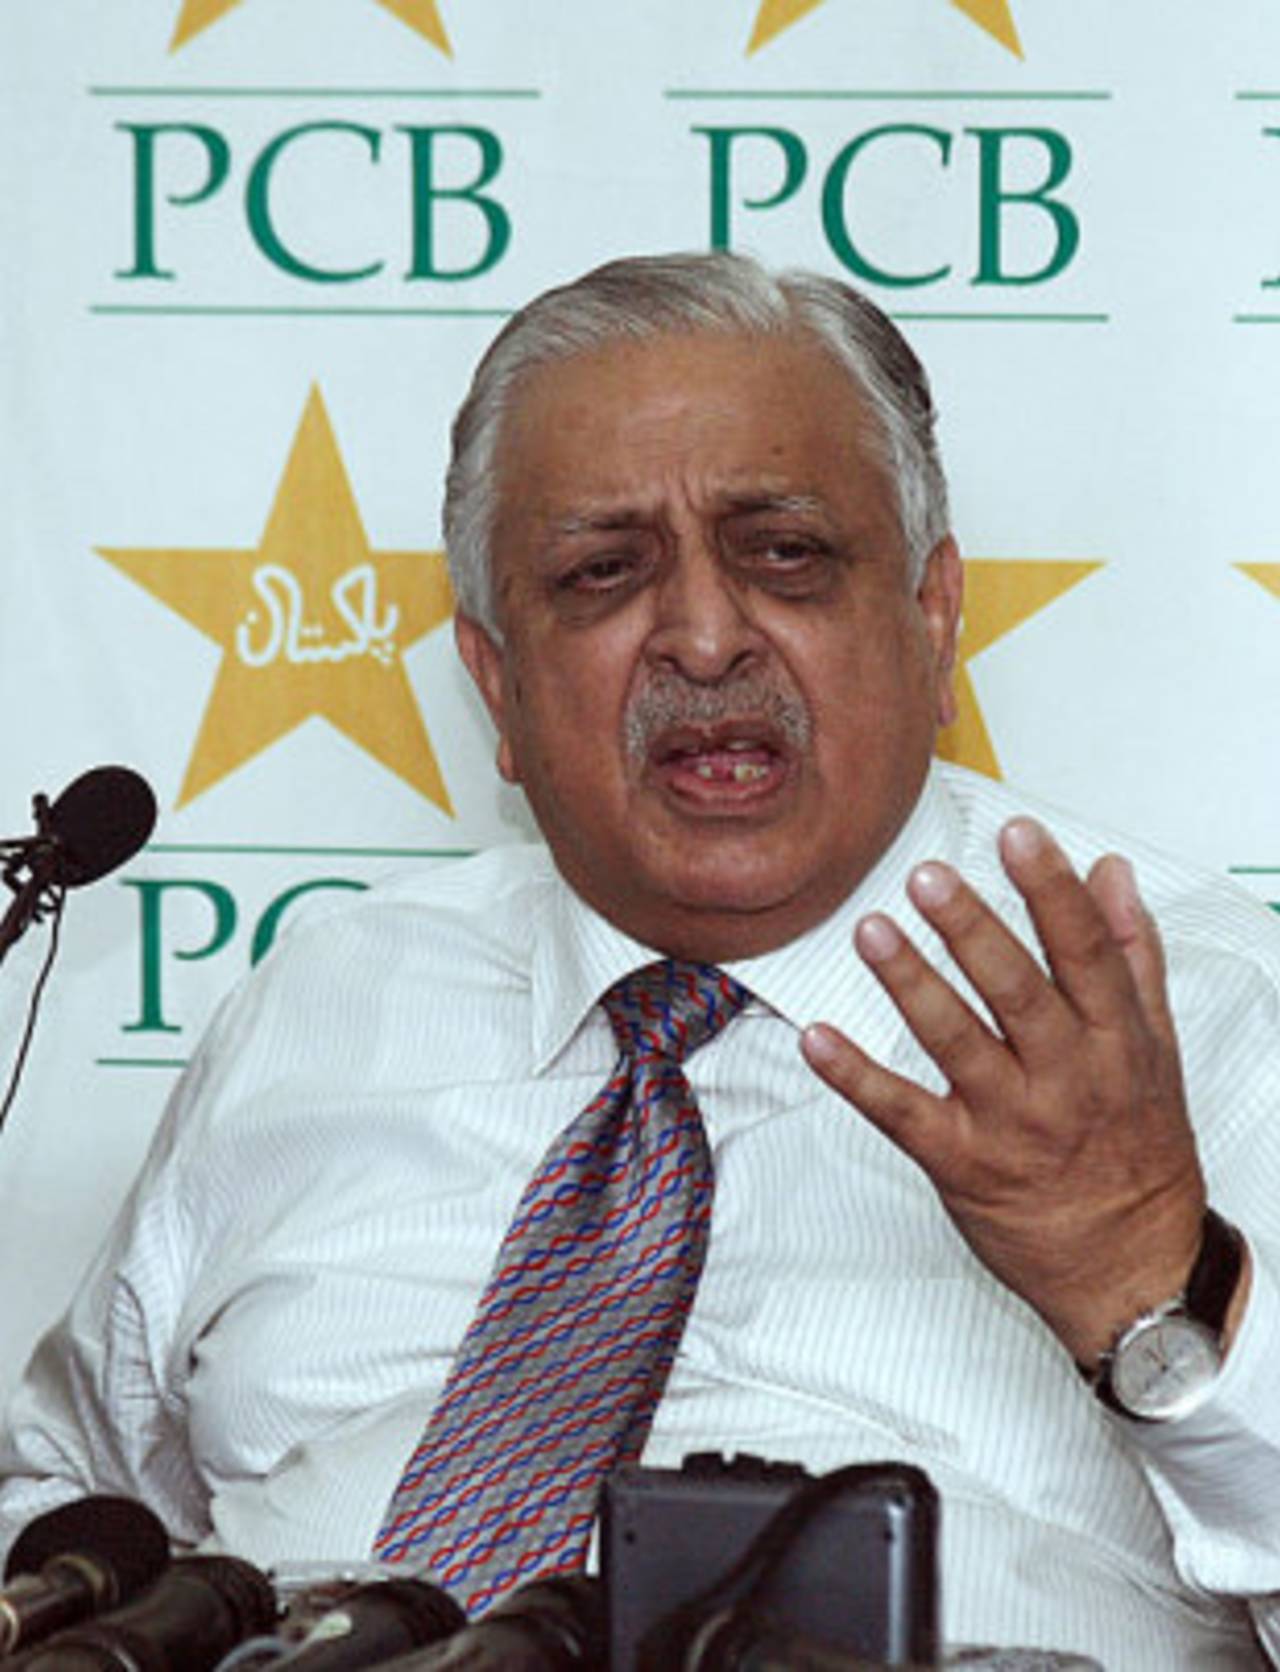 The PCB and its chairman, Ijaz Butt, still don't seem to have grasped the gravity of what happened in Lahore and how things have changed since&nbsp;&nbsp;&bull;&nbsp;&nbsp;AFP